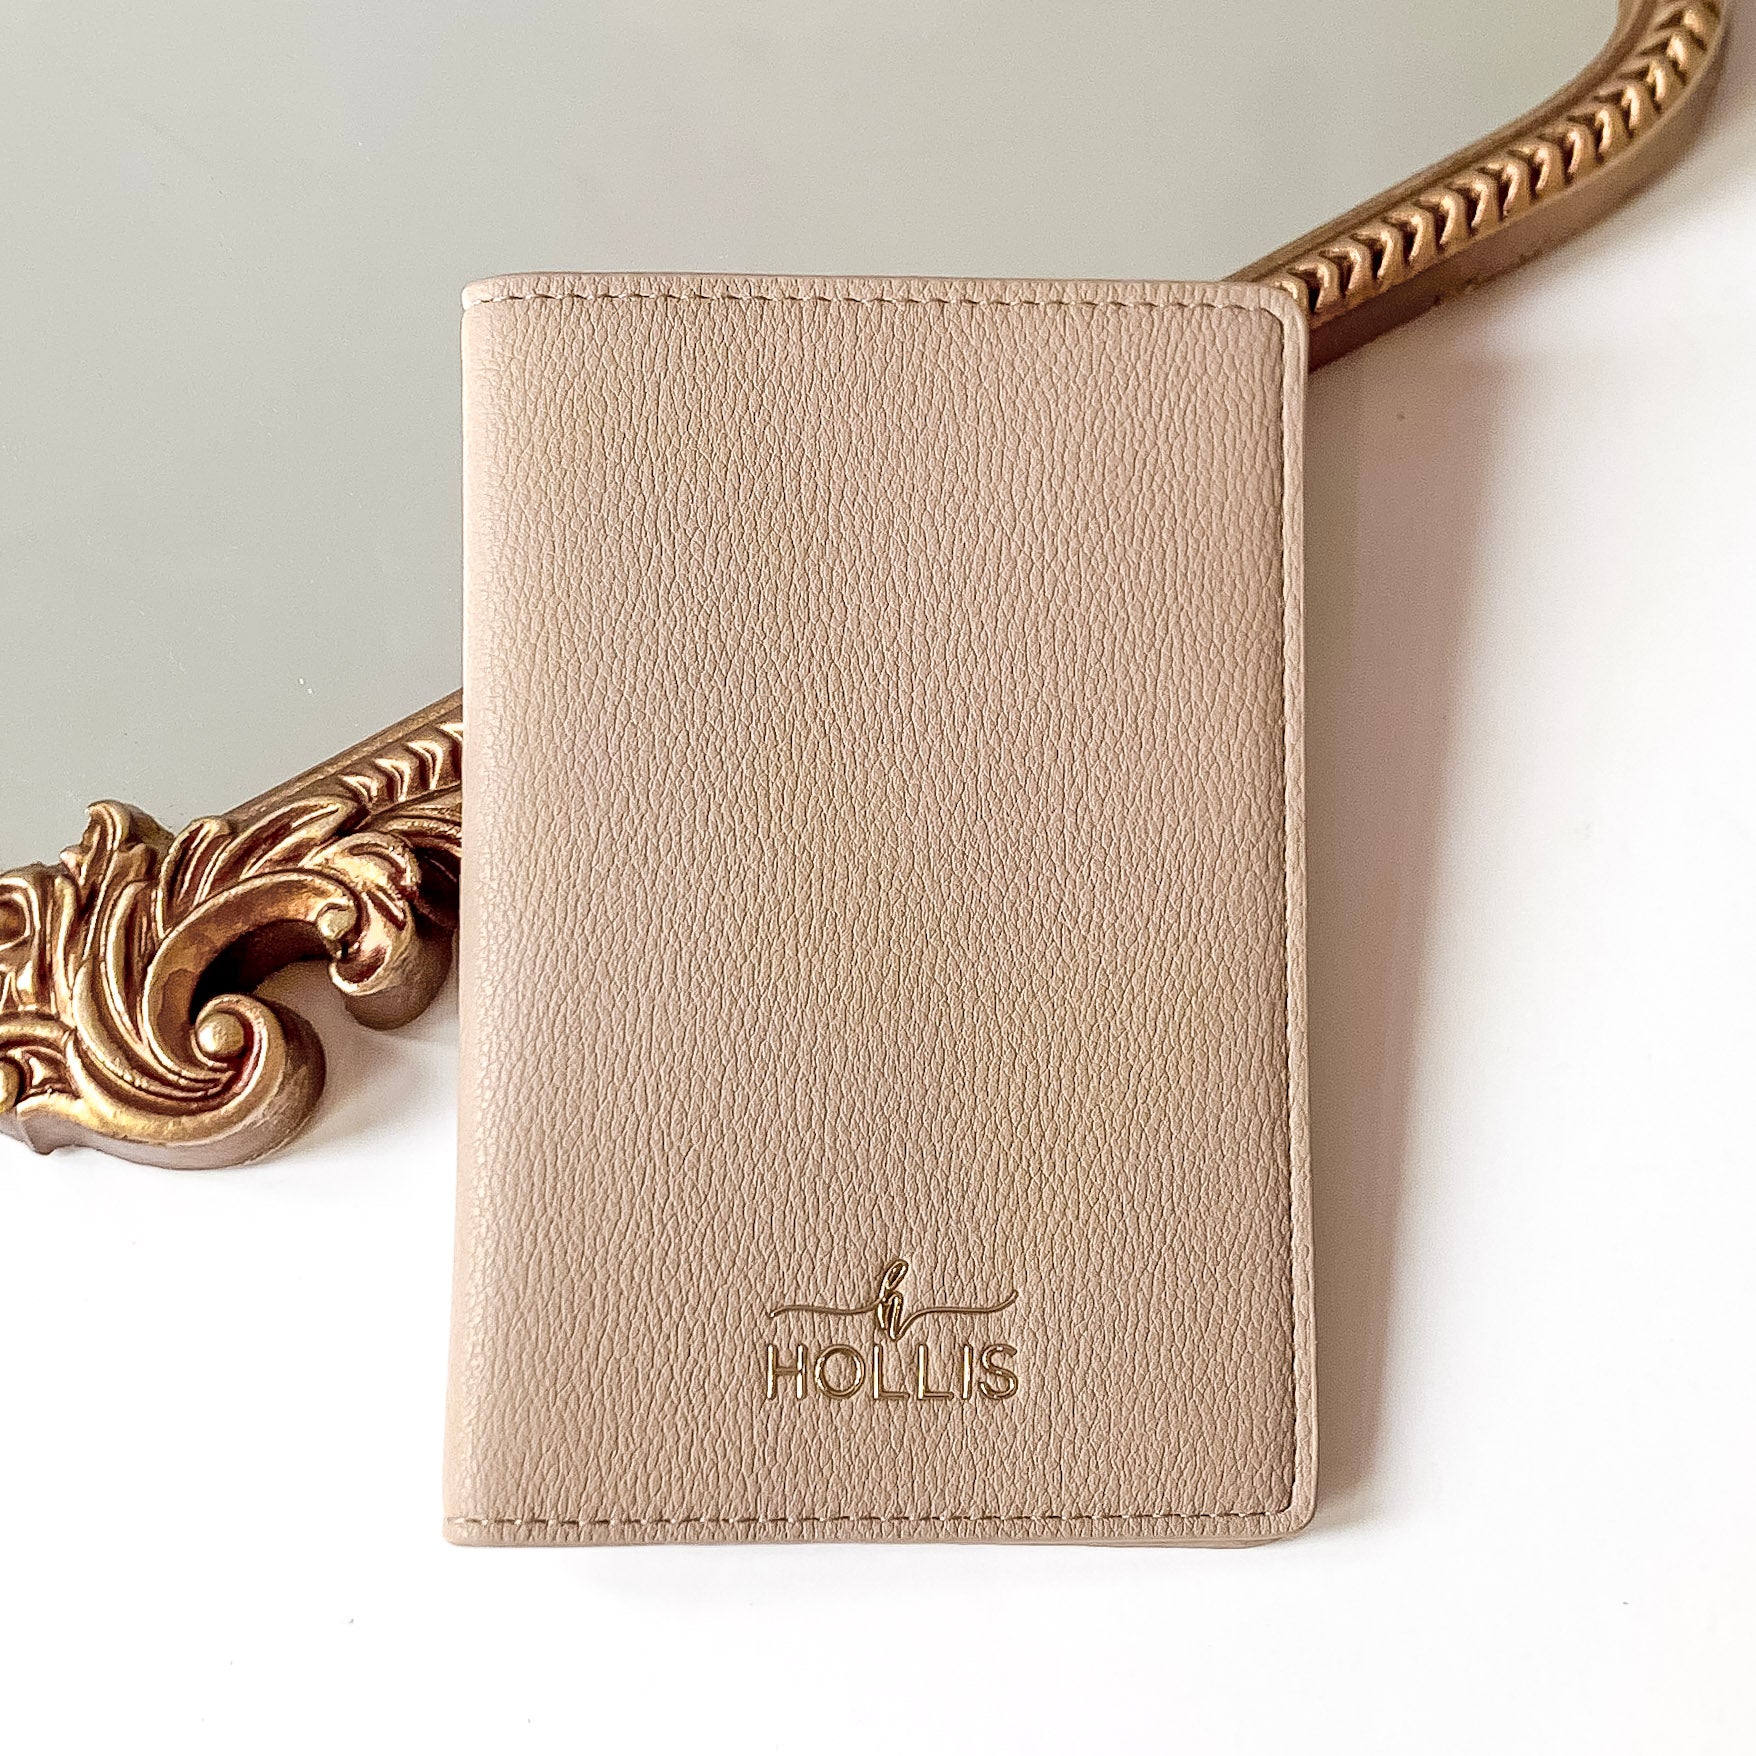 Nude passport holder with a gold HOLLIS emblem at the bottom. This is pictured laying partially on a gold mirror on a white background.